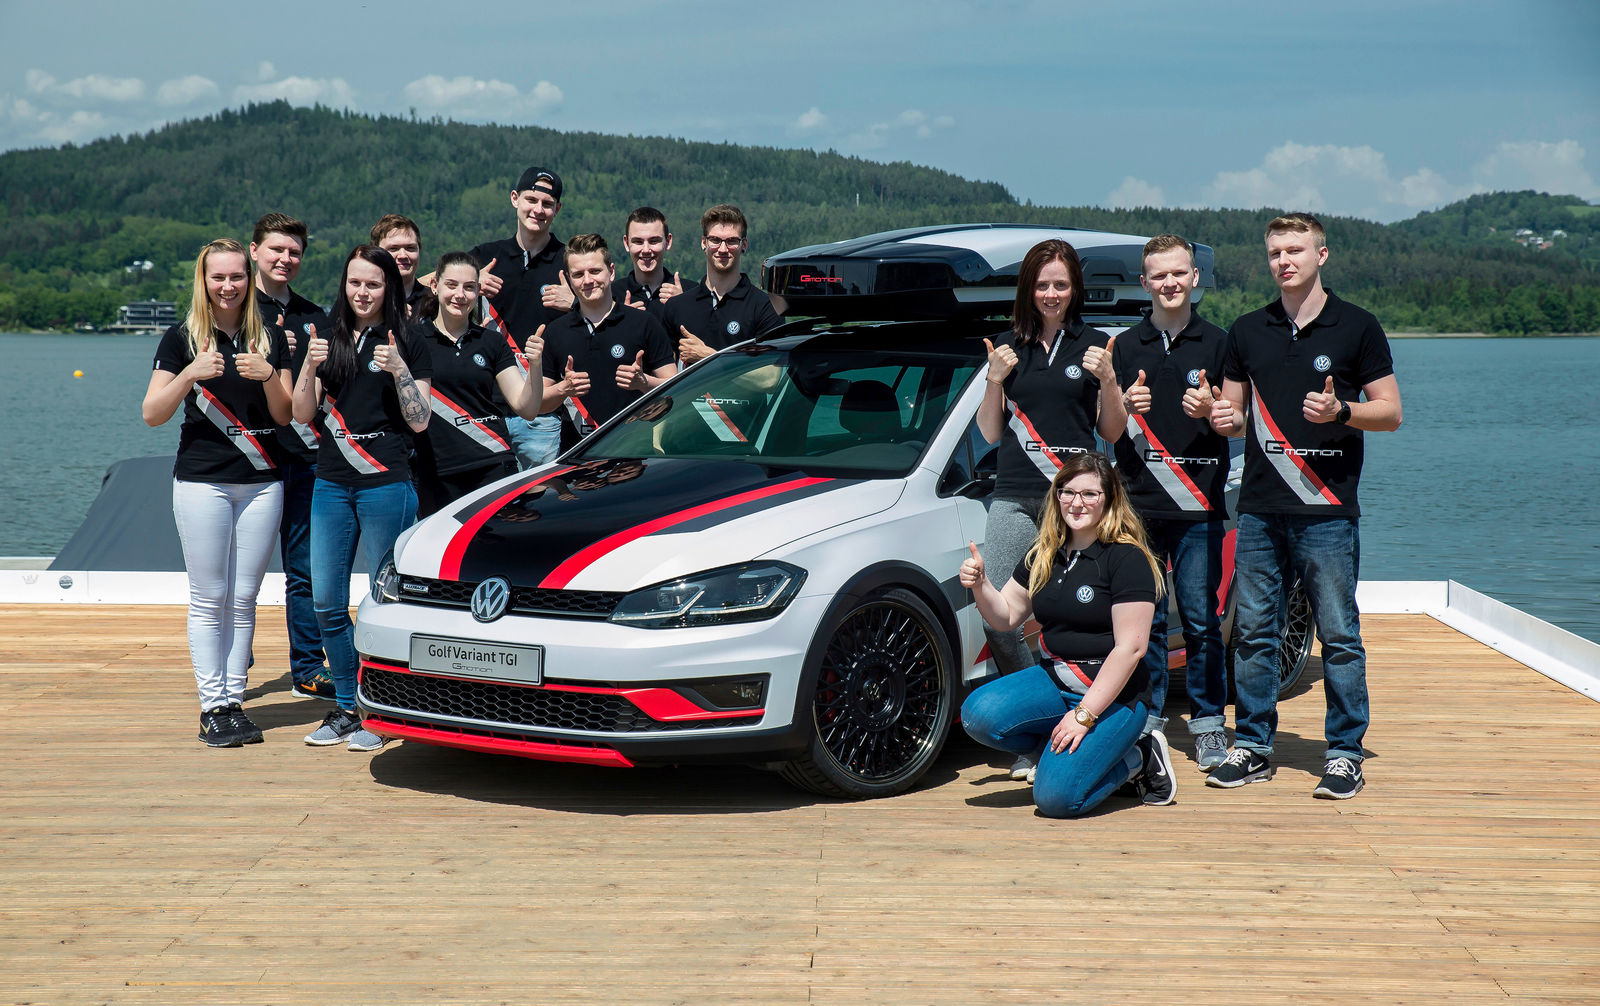 Double premiere at GTI meeting – apprentices from Wolfsburg and Zwickau present the Golf show cars they have developed